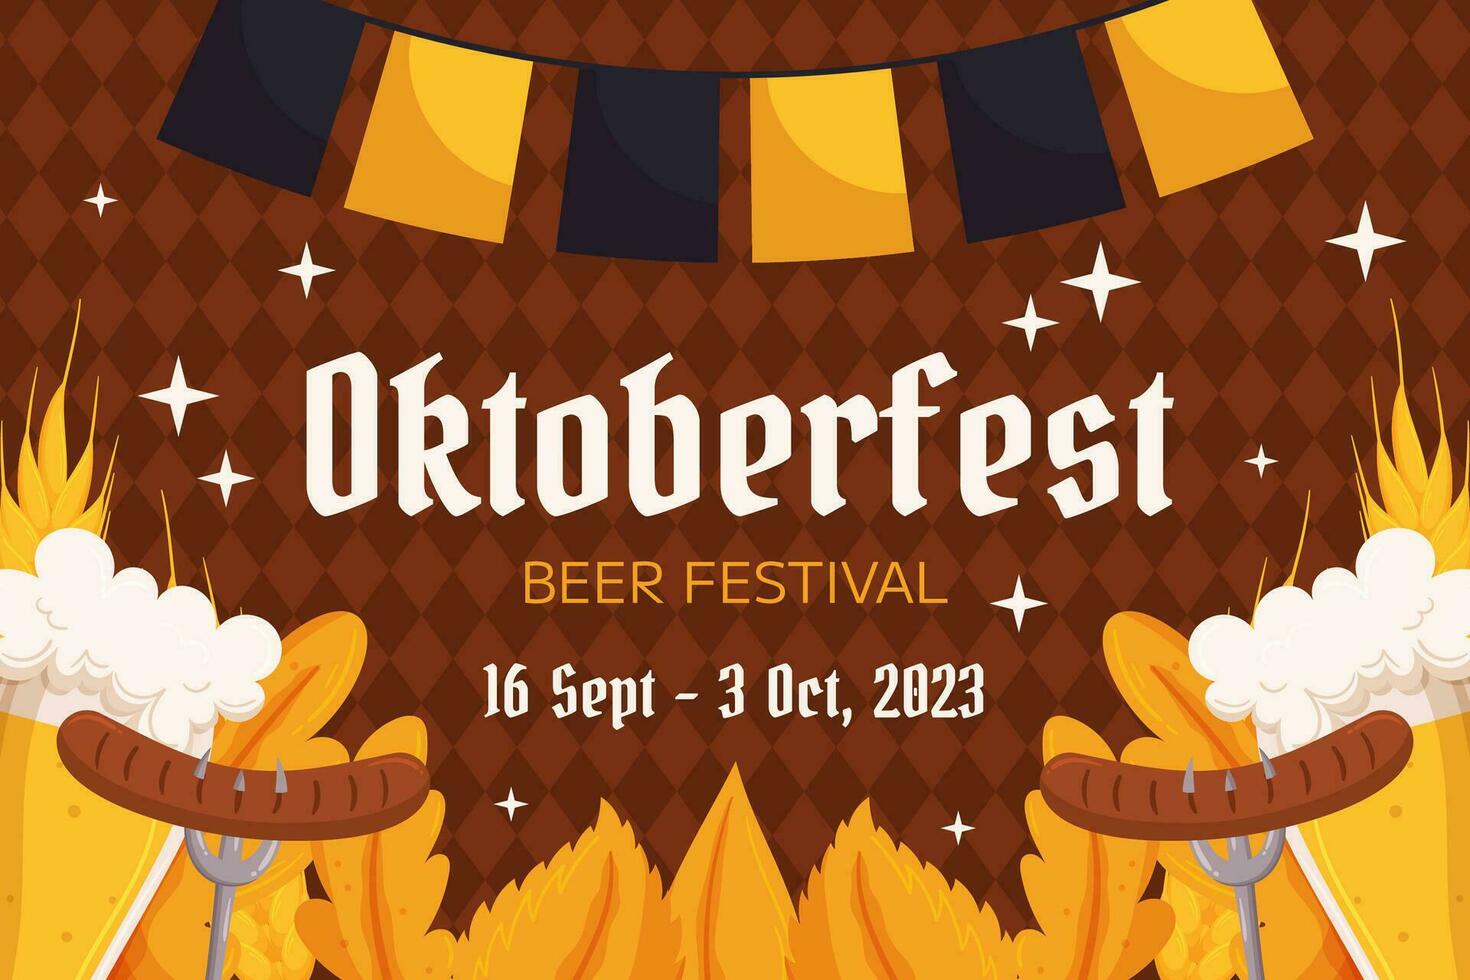 Oktoberfest German beer festival background. Design with glass of beer, forks with grilled sausage, wheat and leaves, black and yellow garland. Rhombus pattern on back vector